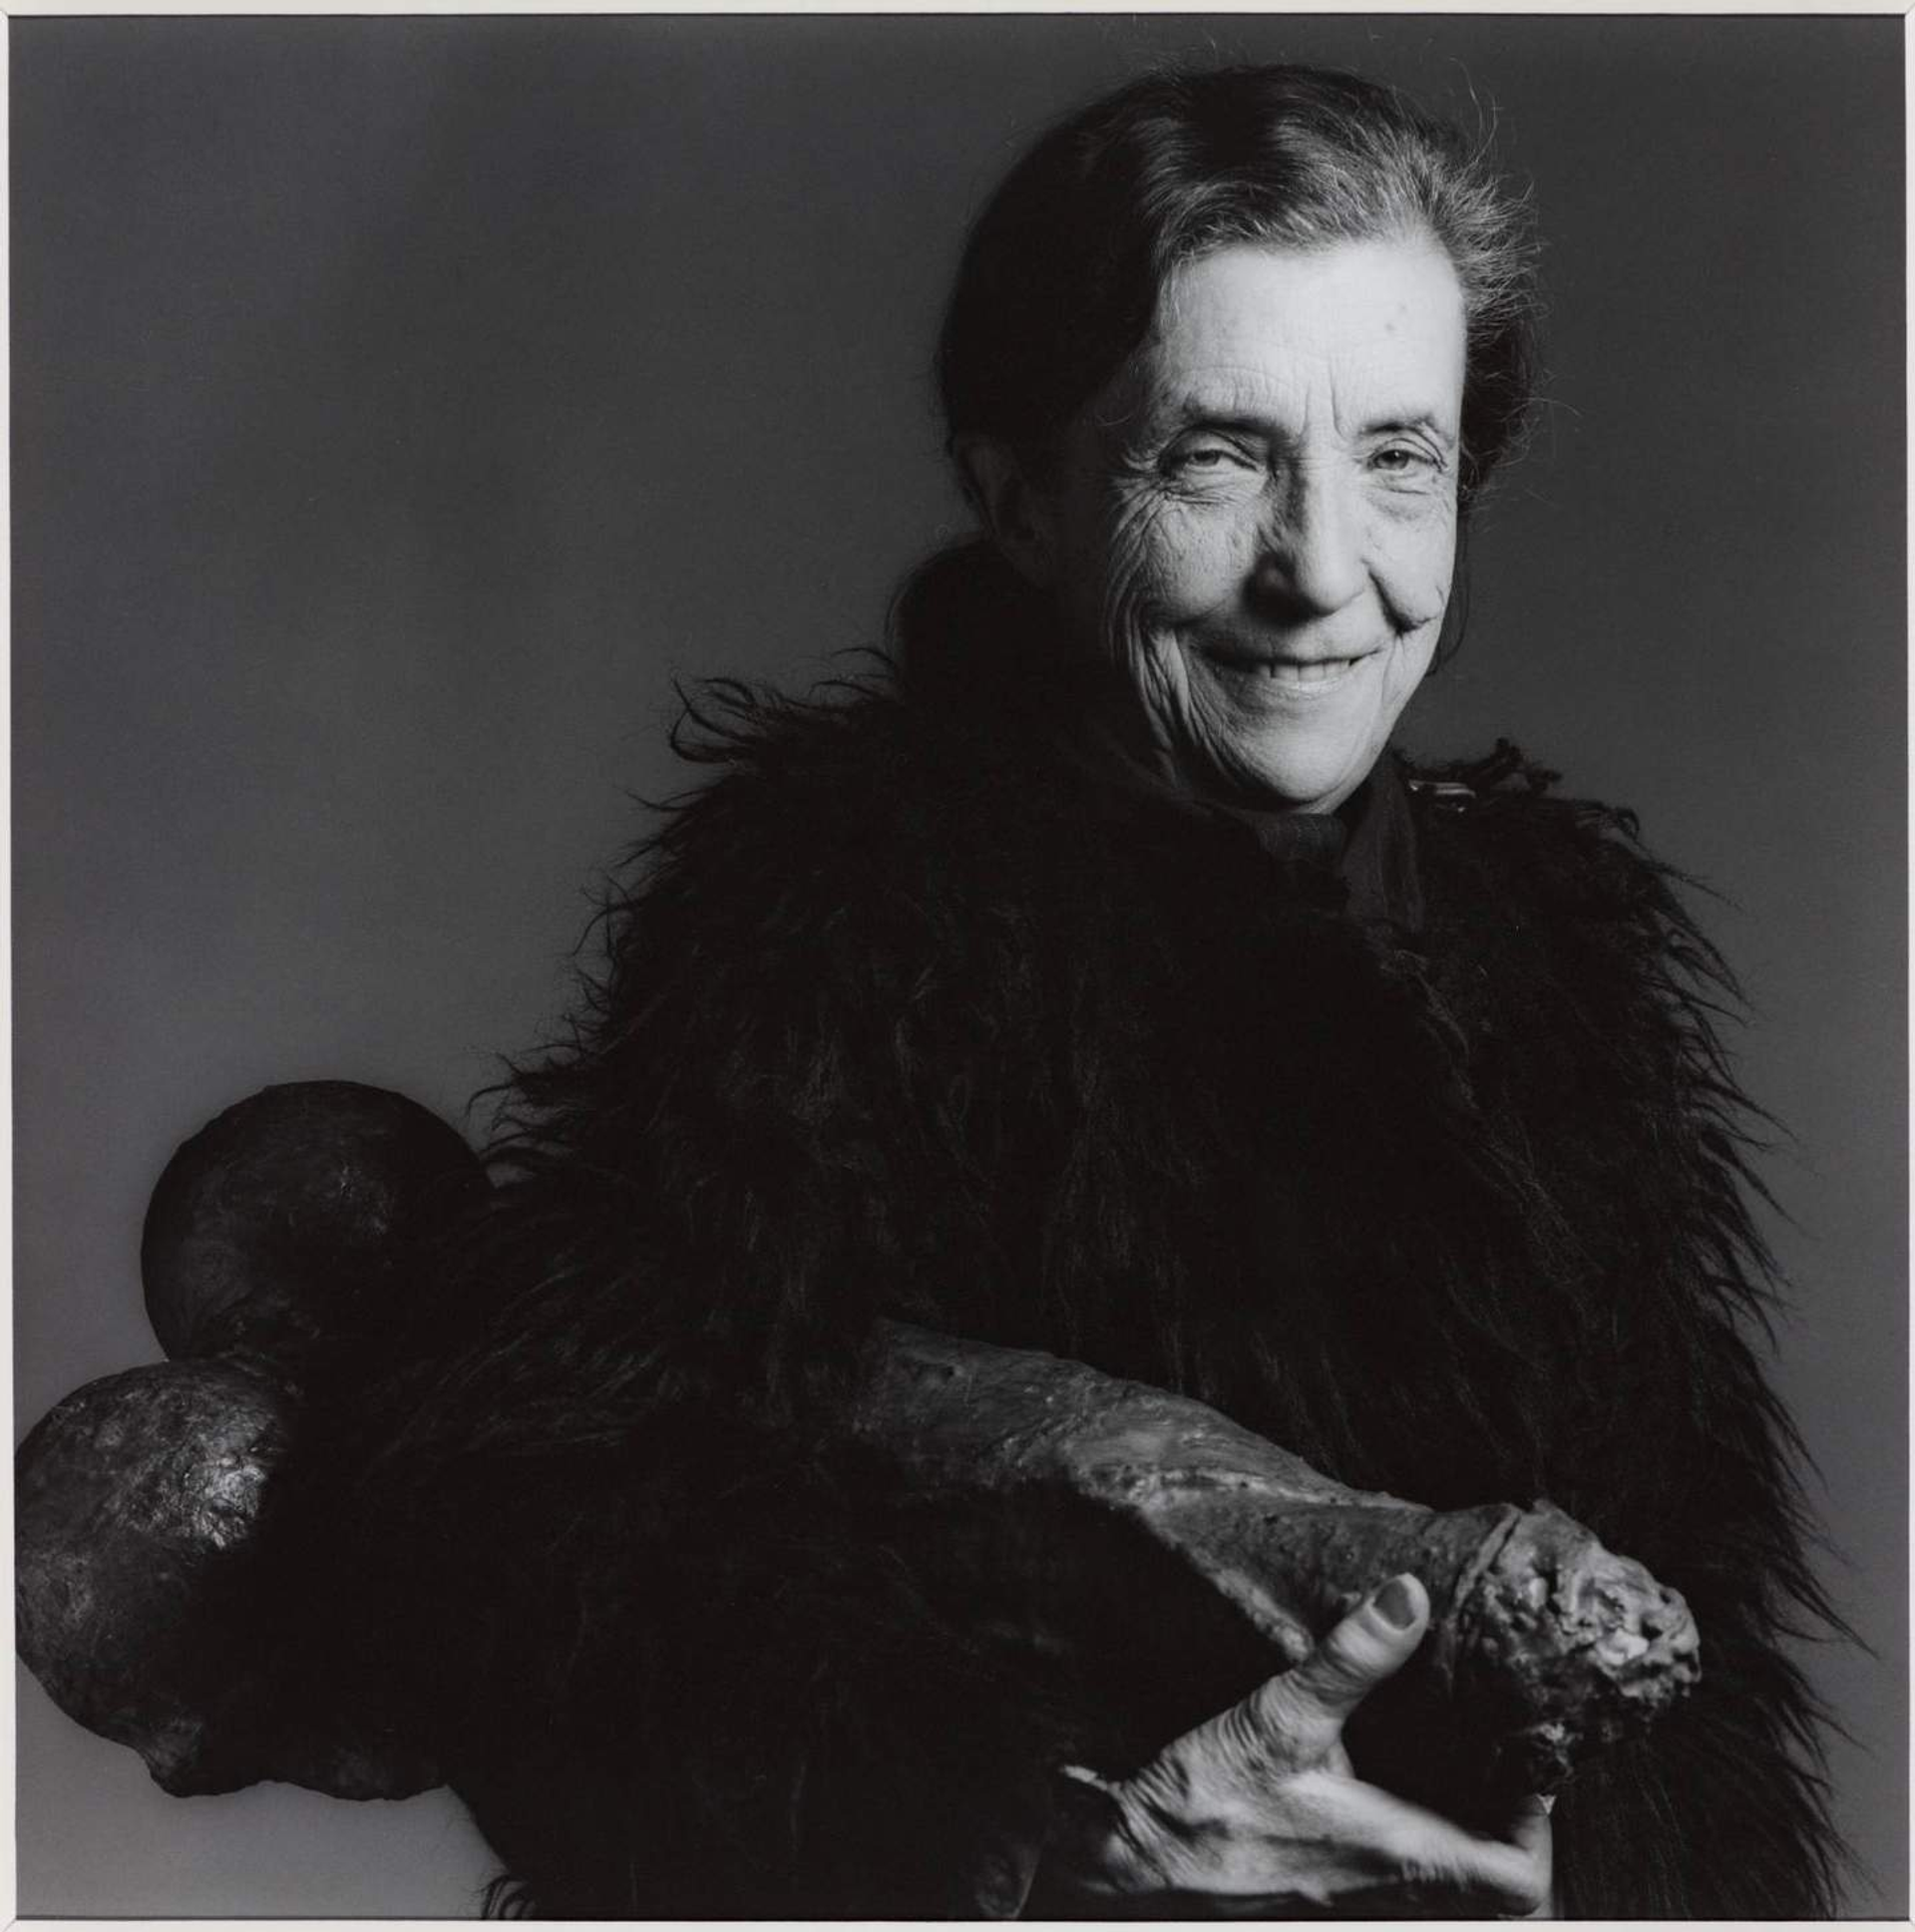 Black and white photograph of artist Louise Bourgeois smiling while holding onto a phallic shape object underneath her arm.